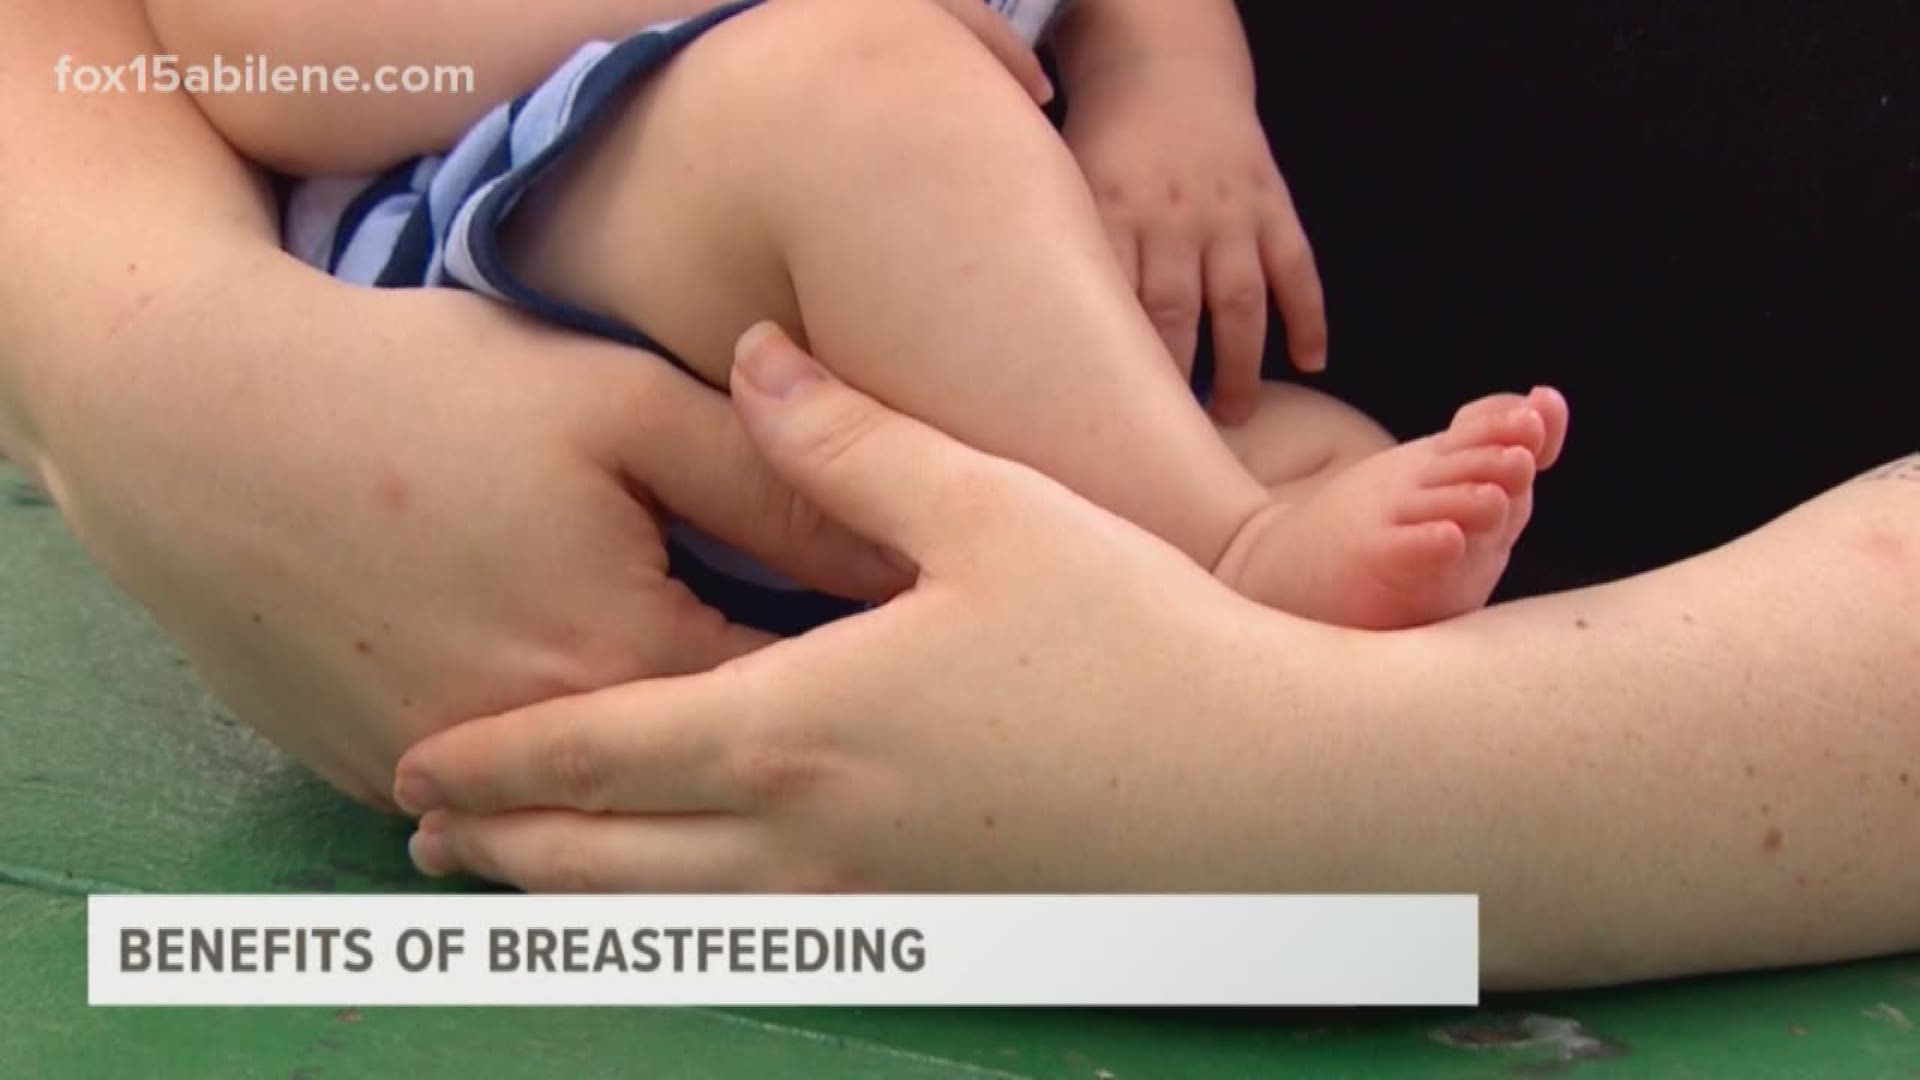 August is a breastfeeding awareness month.